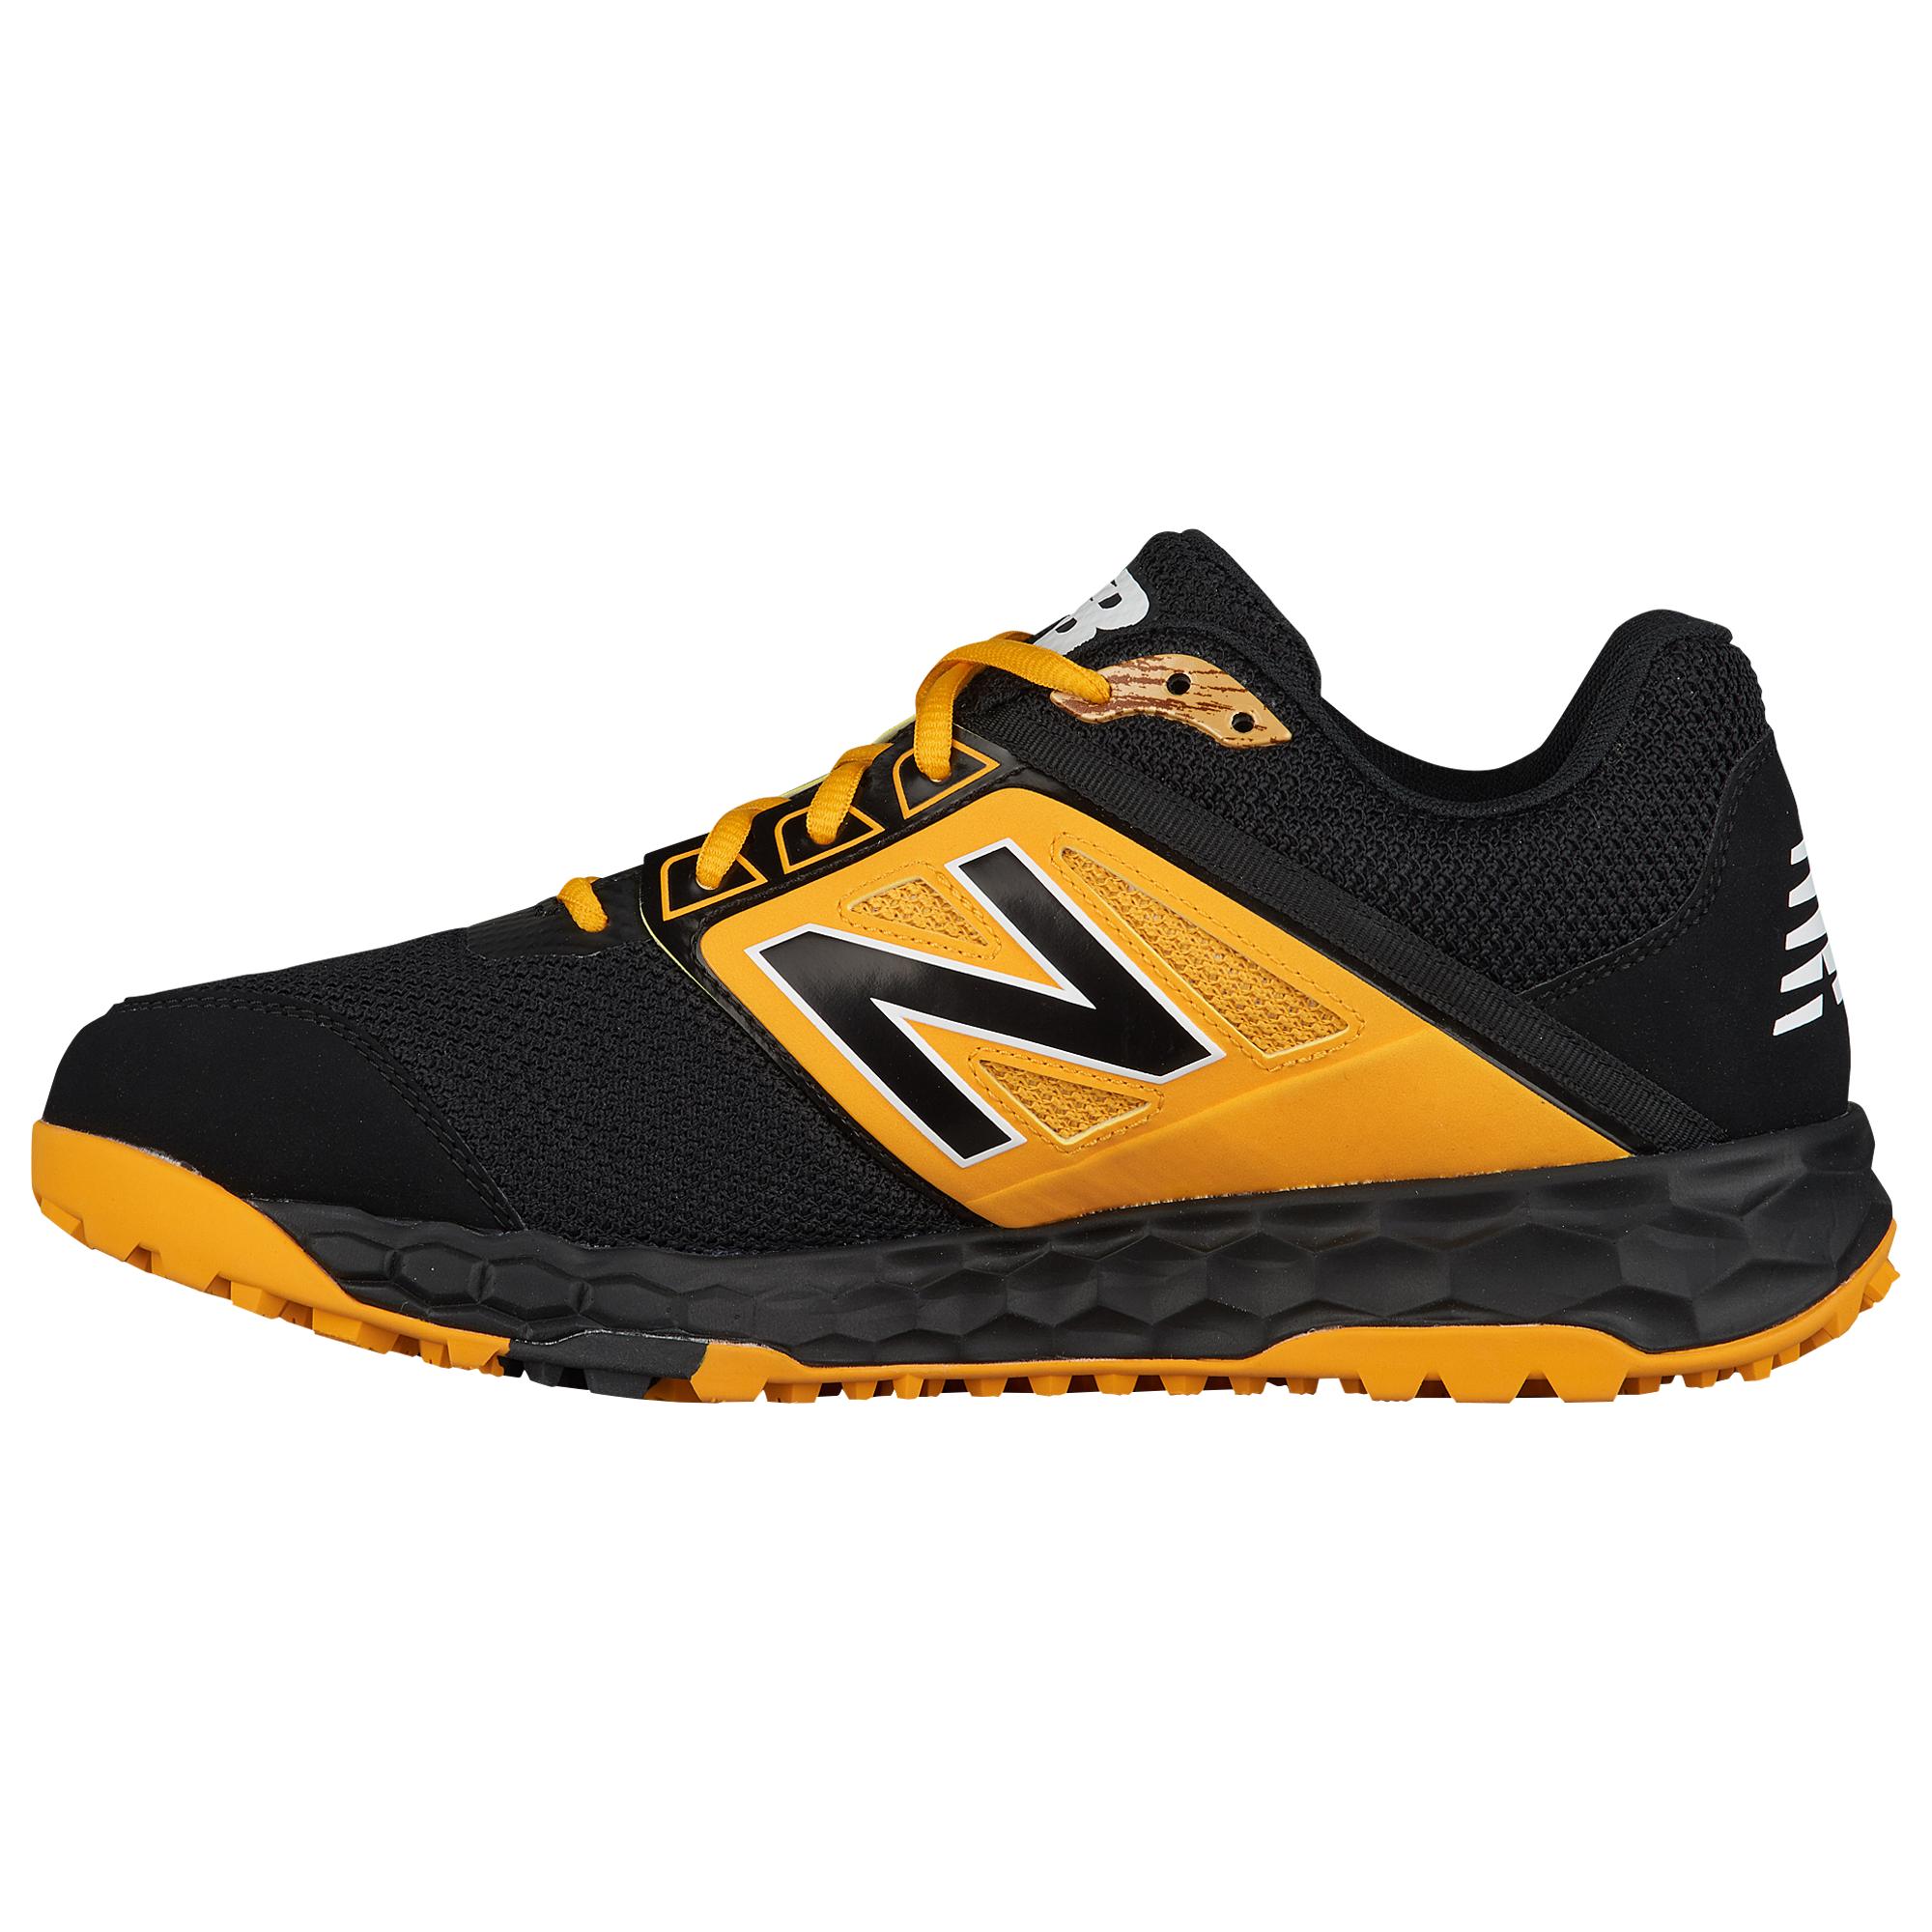 New Balance Lace 3000v4 Turf Turf Shoes in Black/Yellow (Black) for Men ...